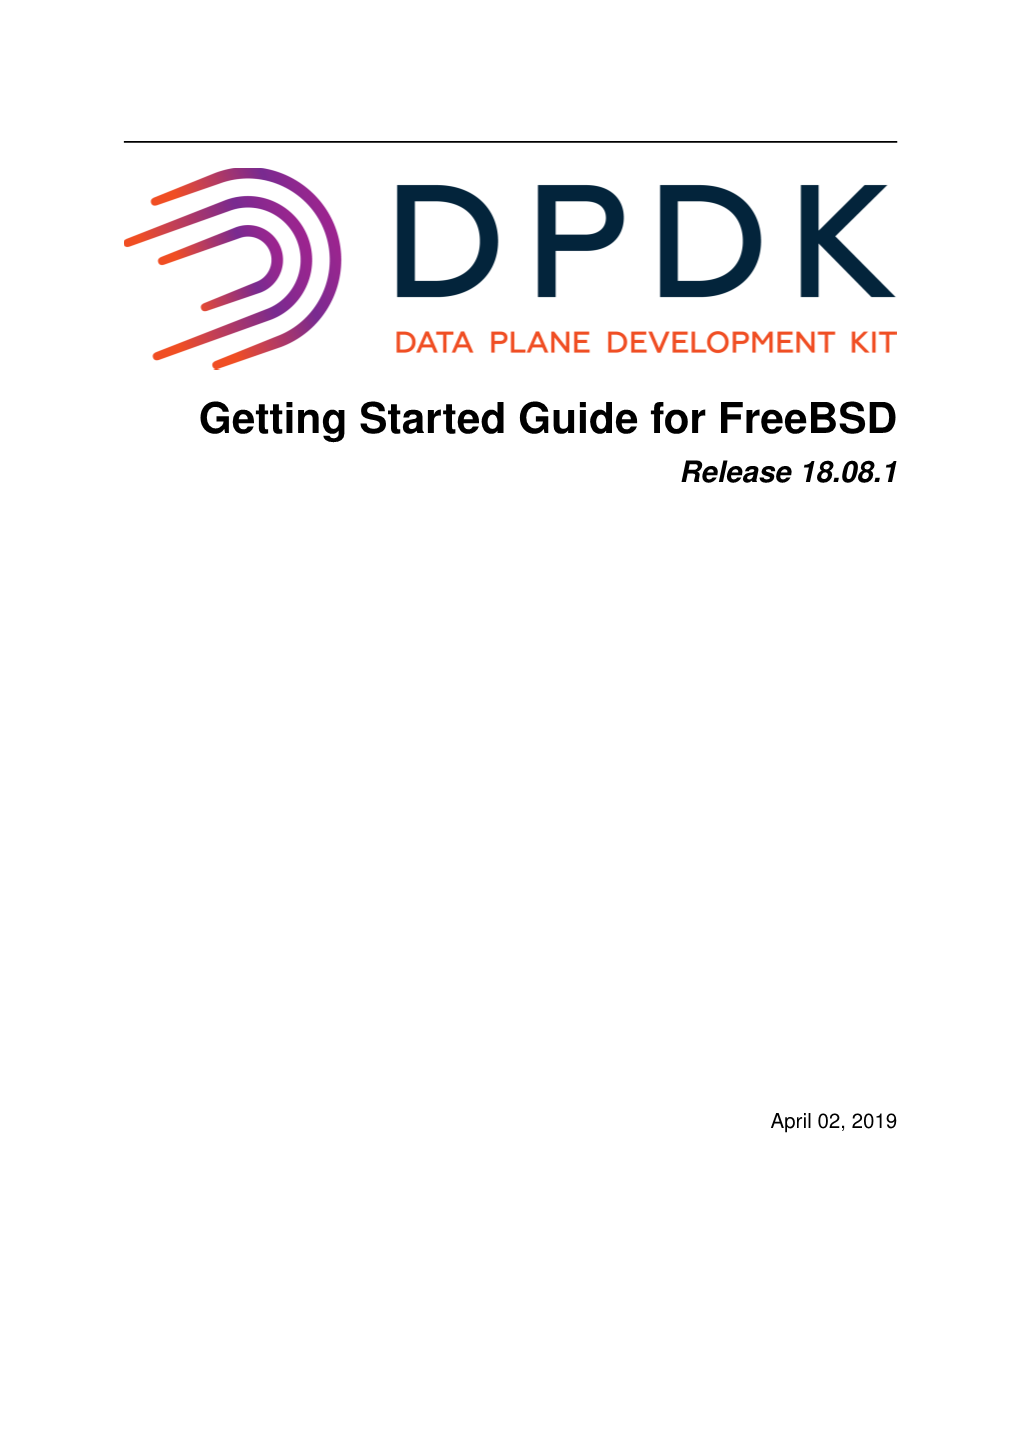 Getting Started Guide for Freebsd Release 18.08.1